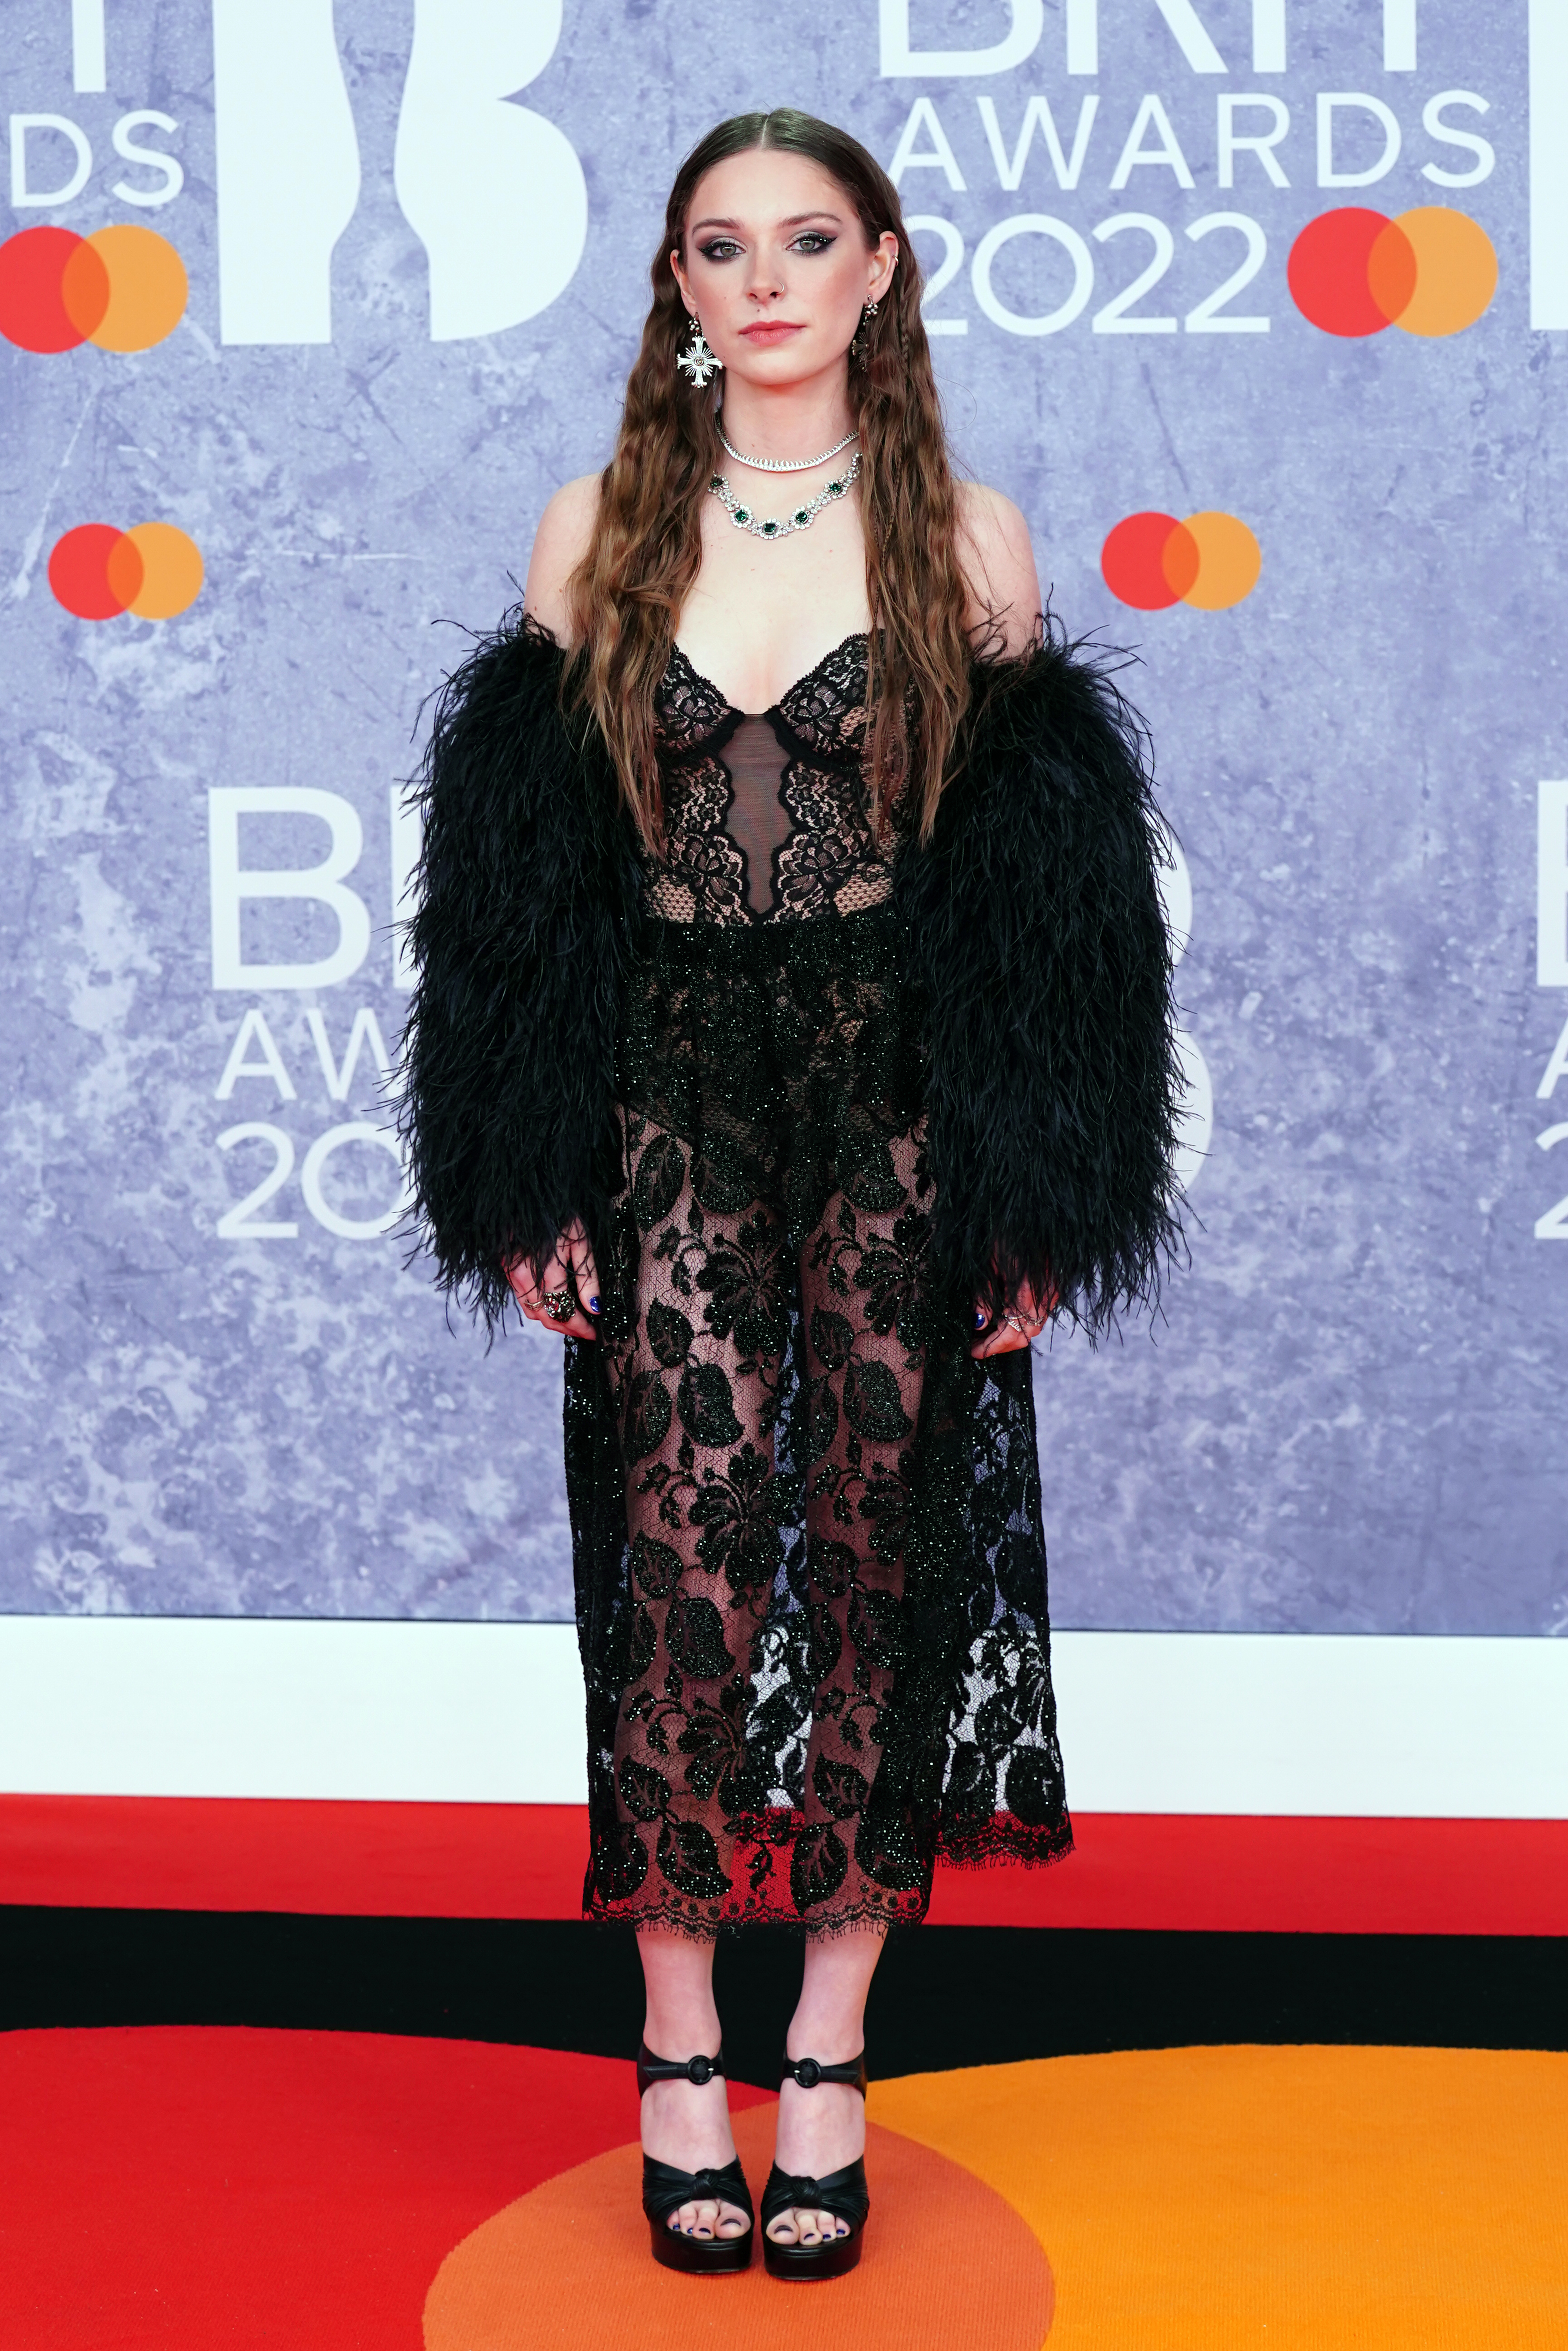 Holly Humberstone at the Brit Awards 2022 